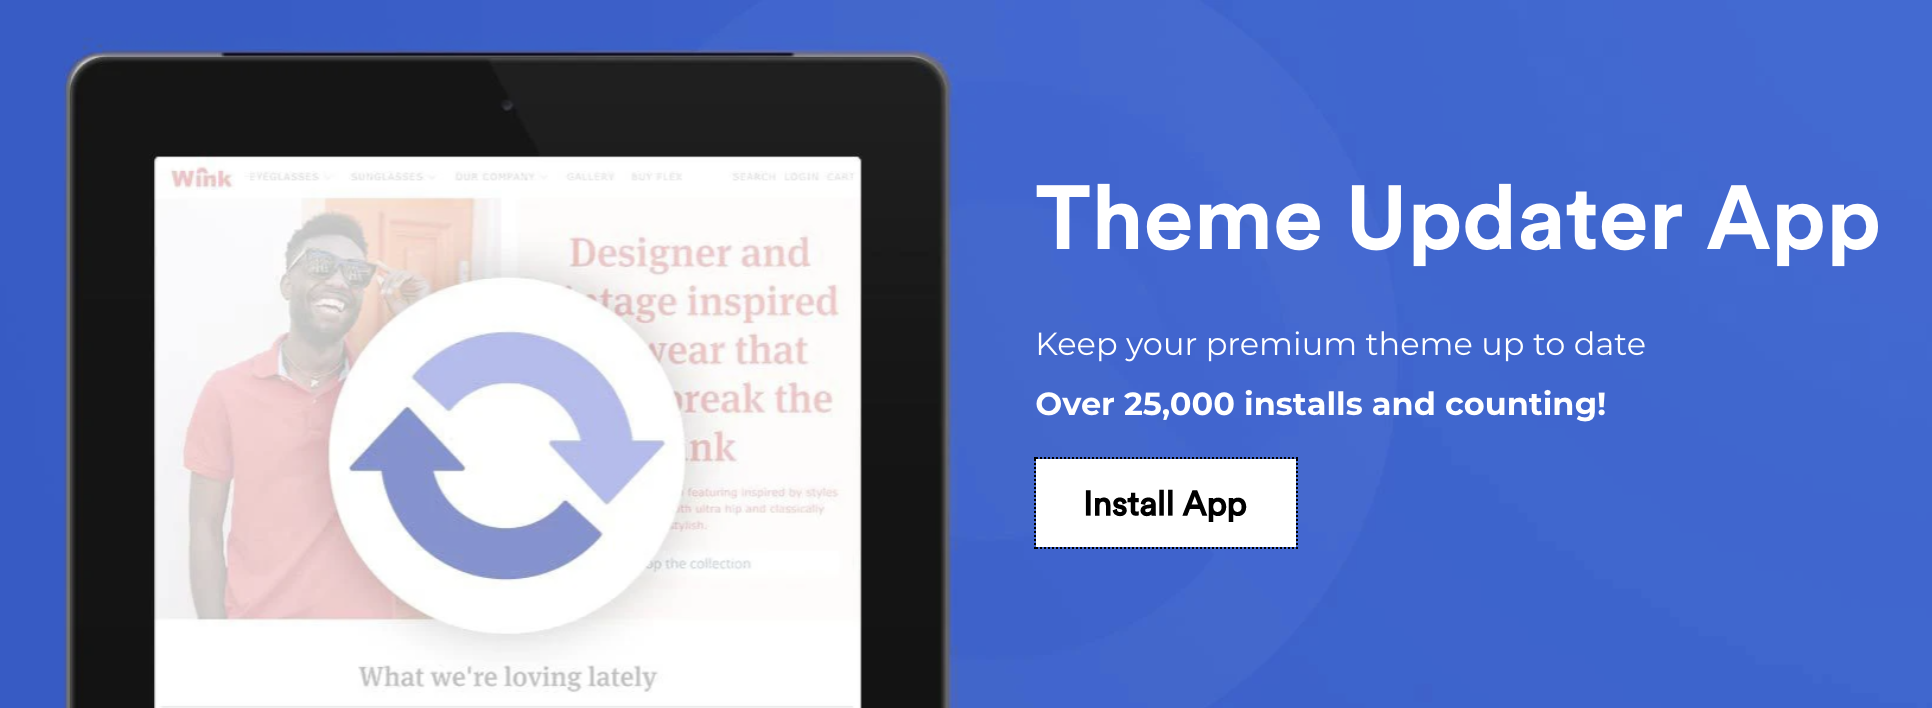 install_the_theme_updater_app_to_preview_turbo.png